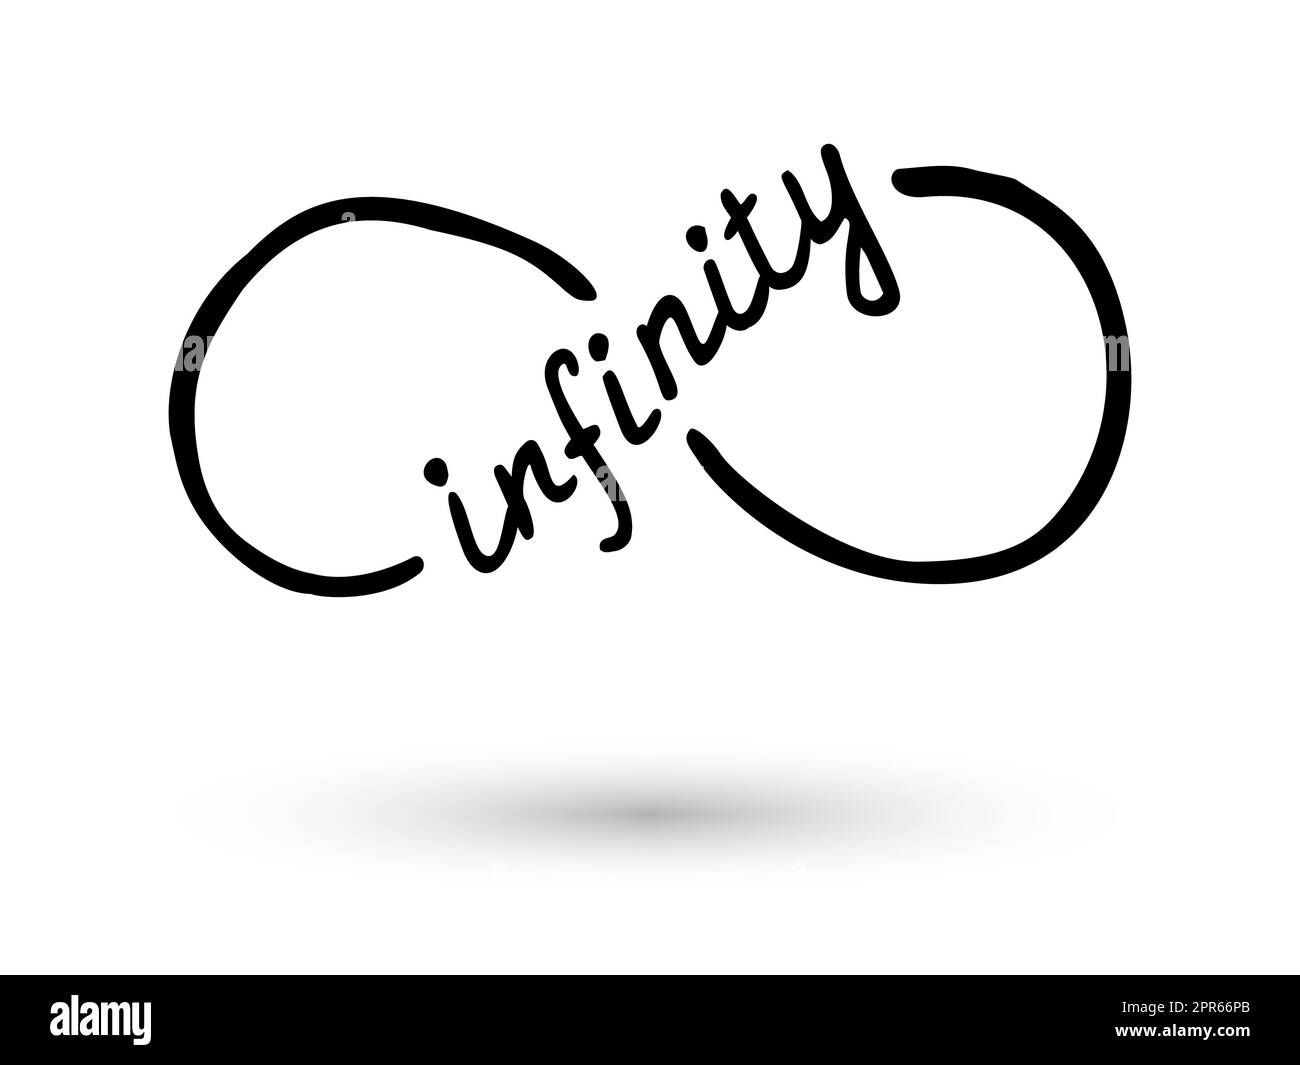 Infinity symbol and infinity word hand drawn with ink brush. Thin line scribble icon. Modern doodle grunge outline. Endless, life concept. Graphic des Stock Photo